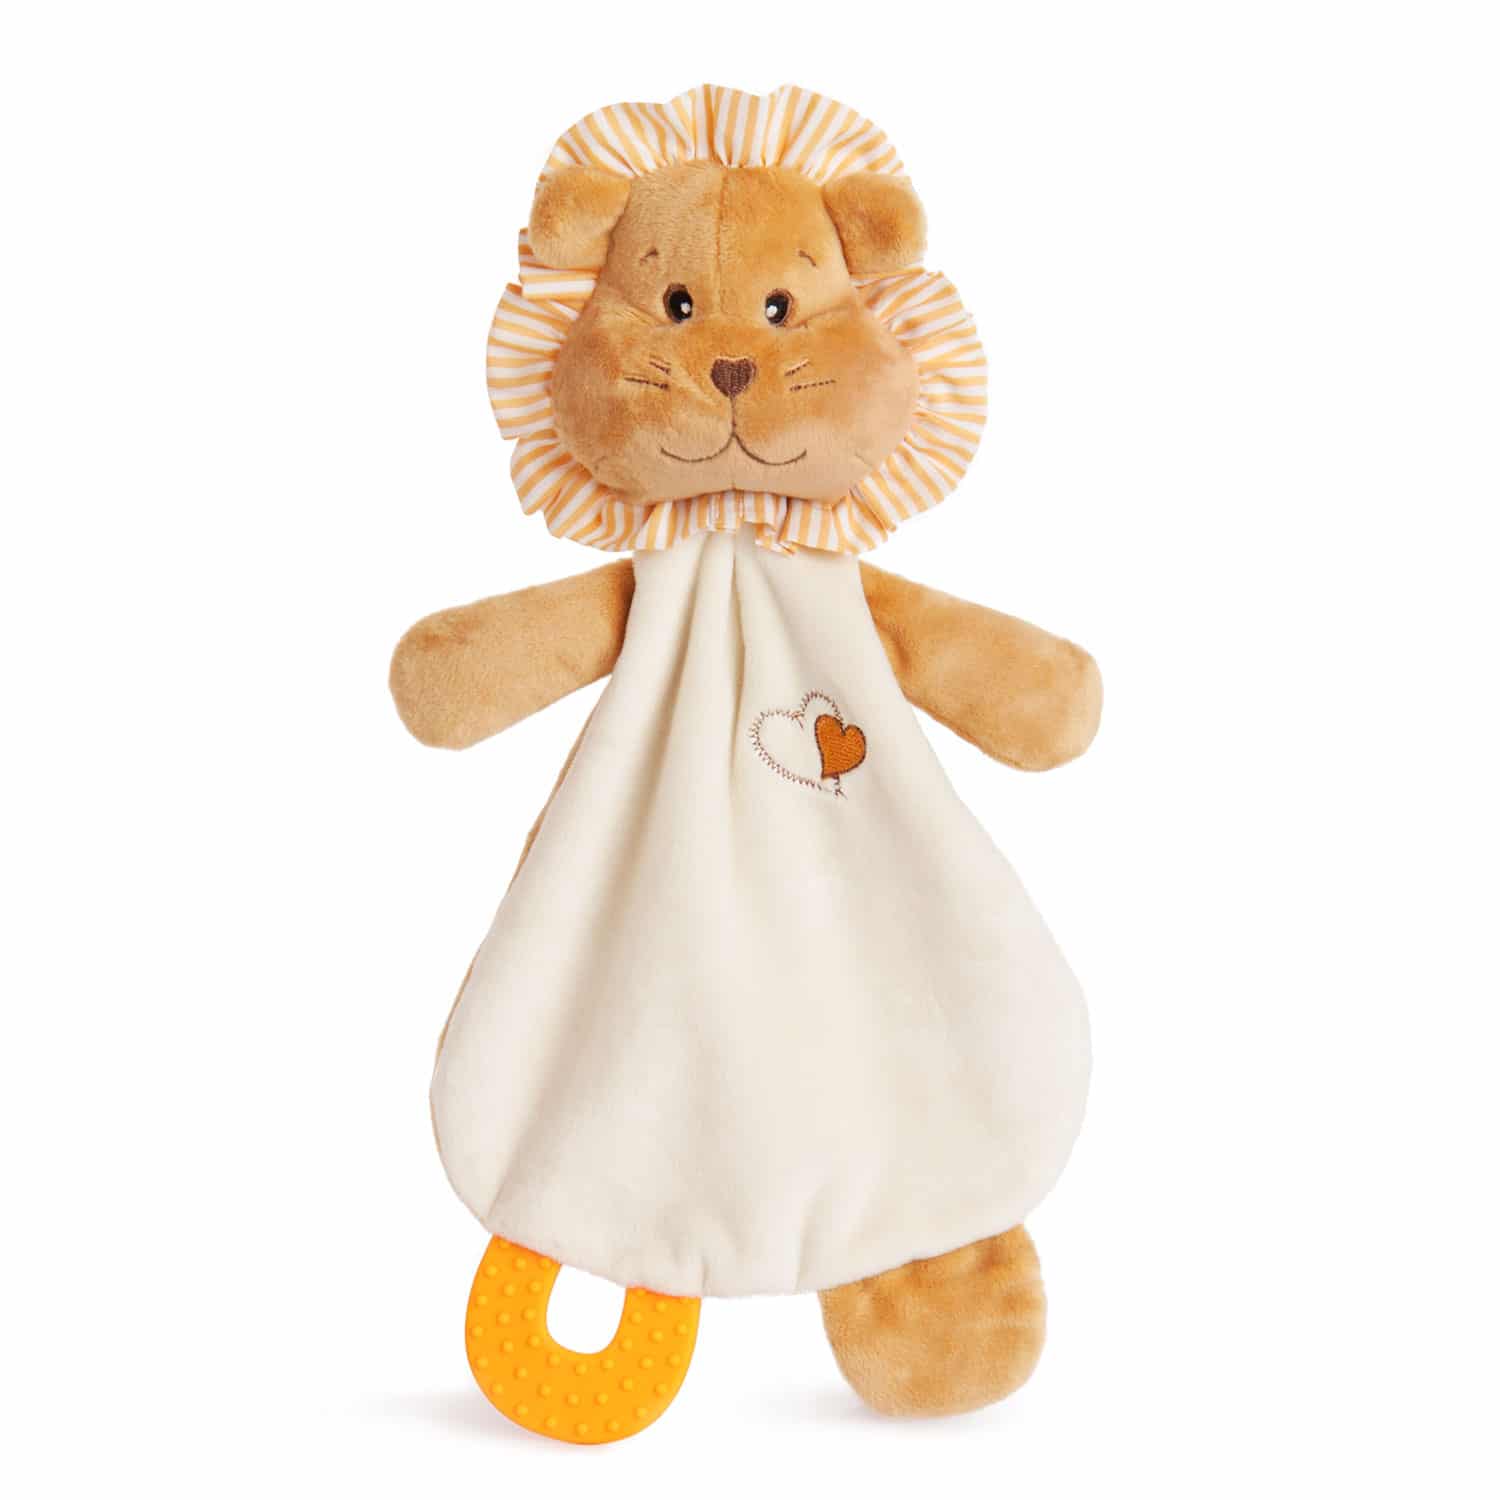 Soft toy for cuddling with lion